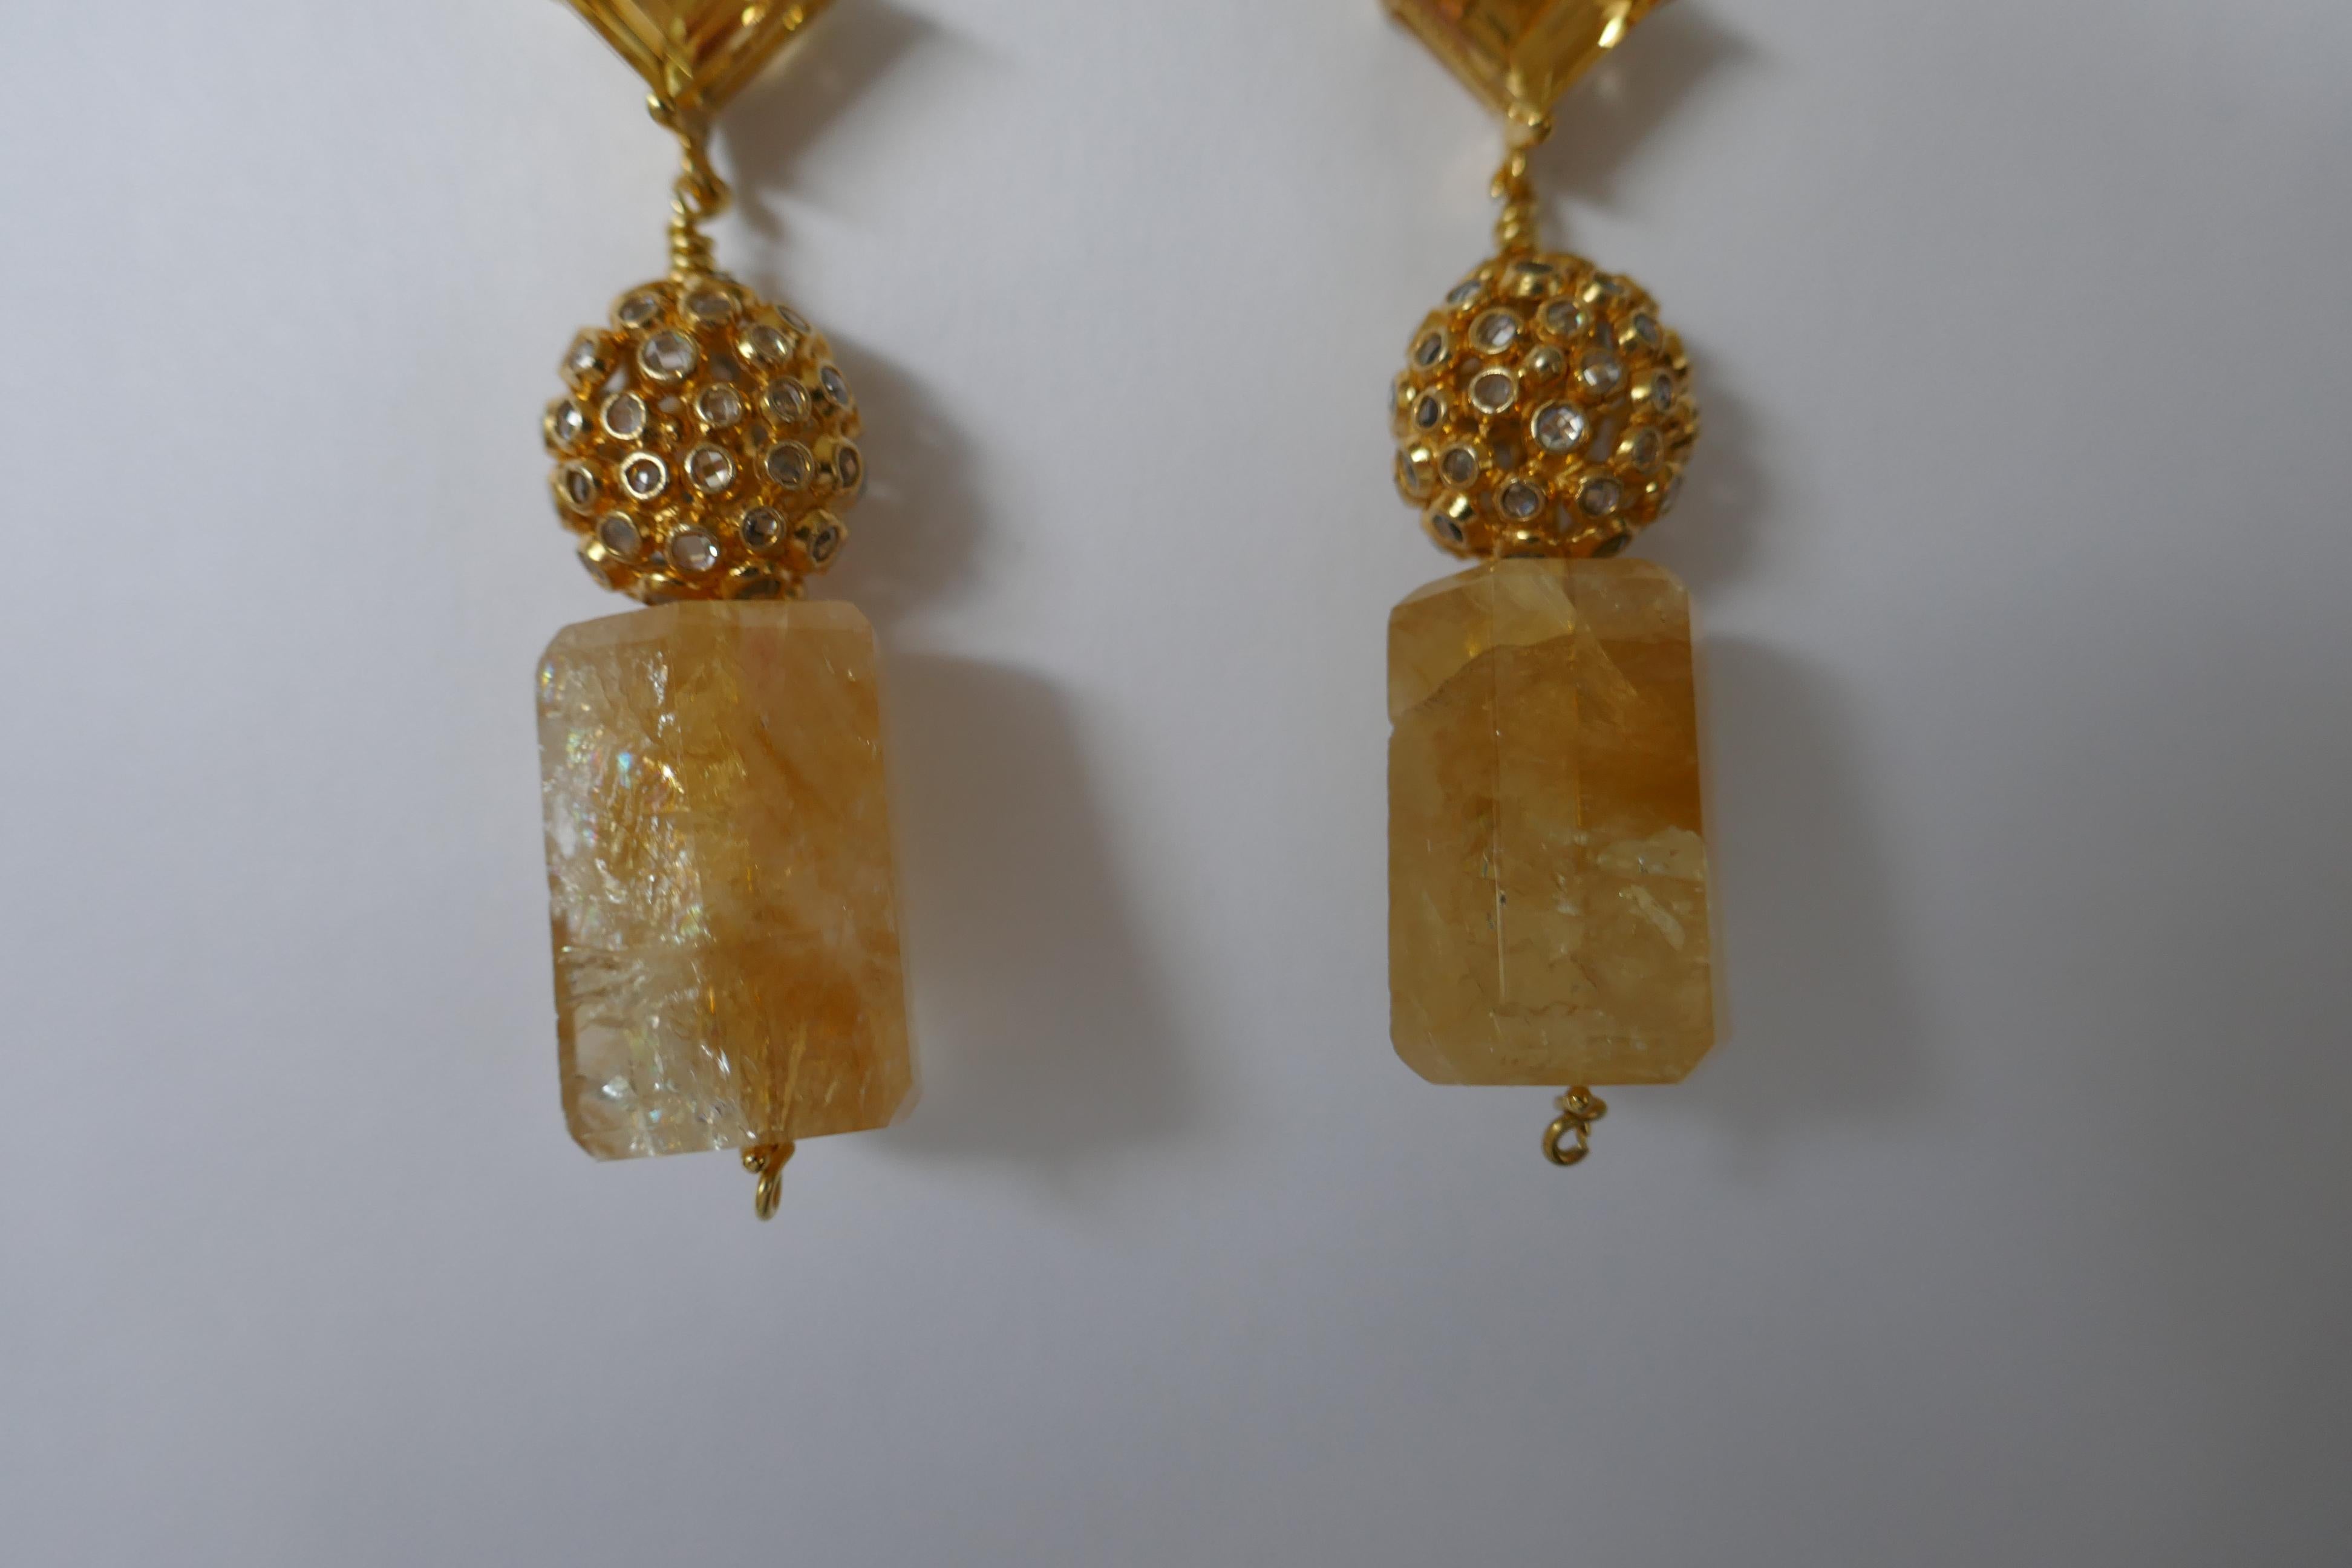 These citrine earrings are stunning. The earrings post are 10mm x 10mm citrine on 14k plated sterling silver, oval sphere is 14k plated sterling silver and white topaz, the citrine bead at the bottom is approximately 13mm x 19mm. The large back are